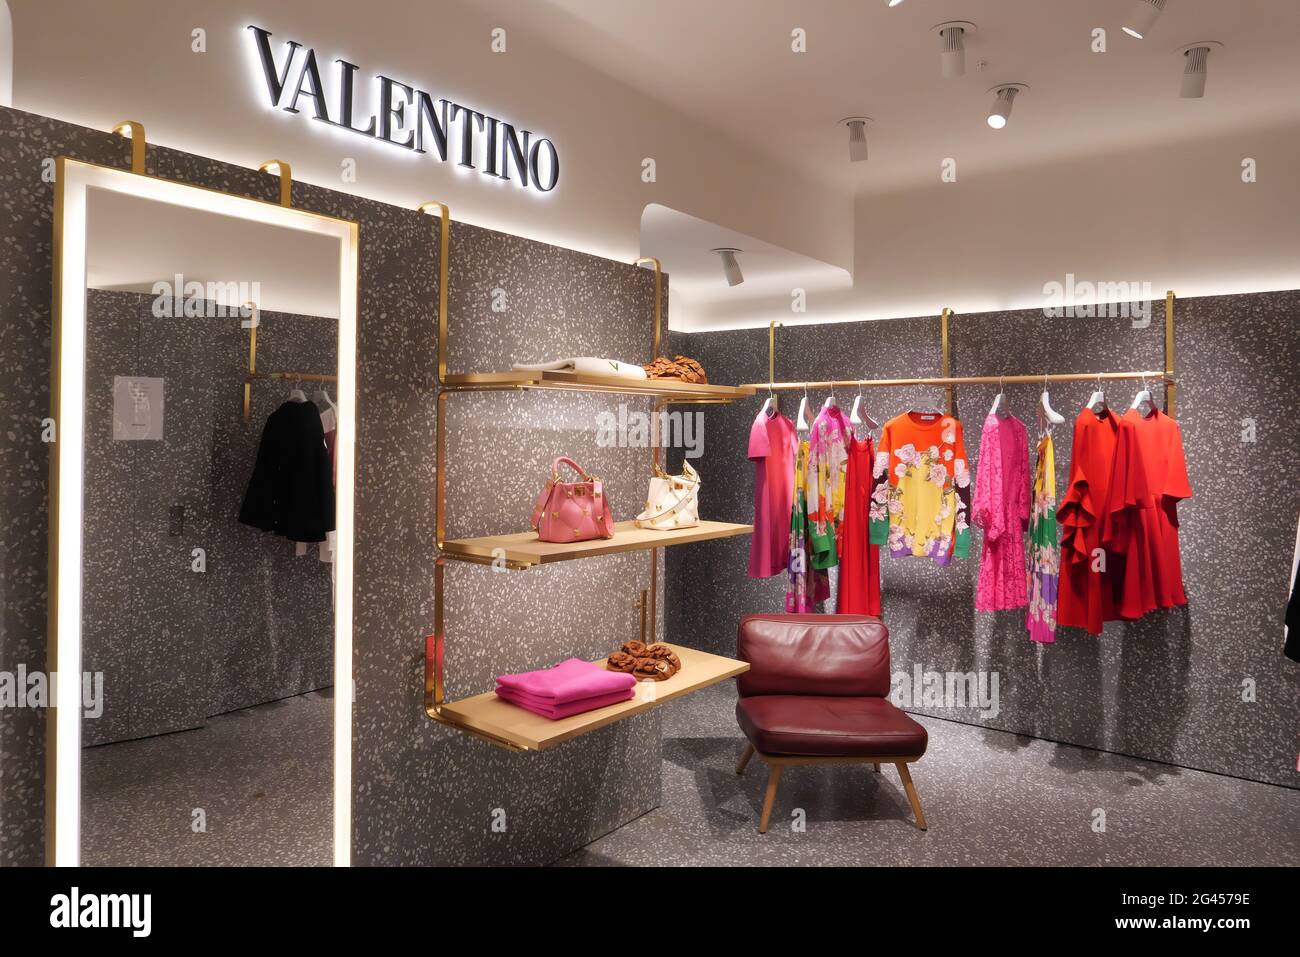 ON DISPLAY AT VALENTINO BOUTIQUE INSIDE THE RINESCENTE FASHION STORE Stock Photo - Alamy